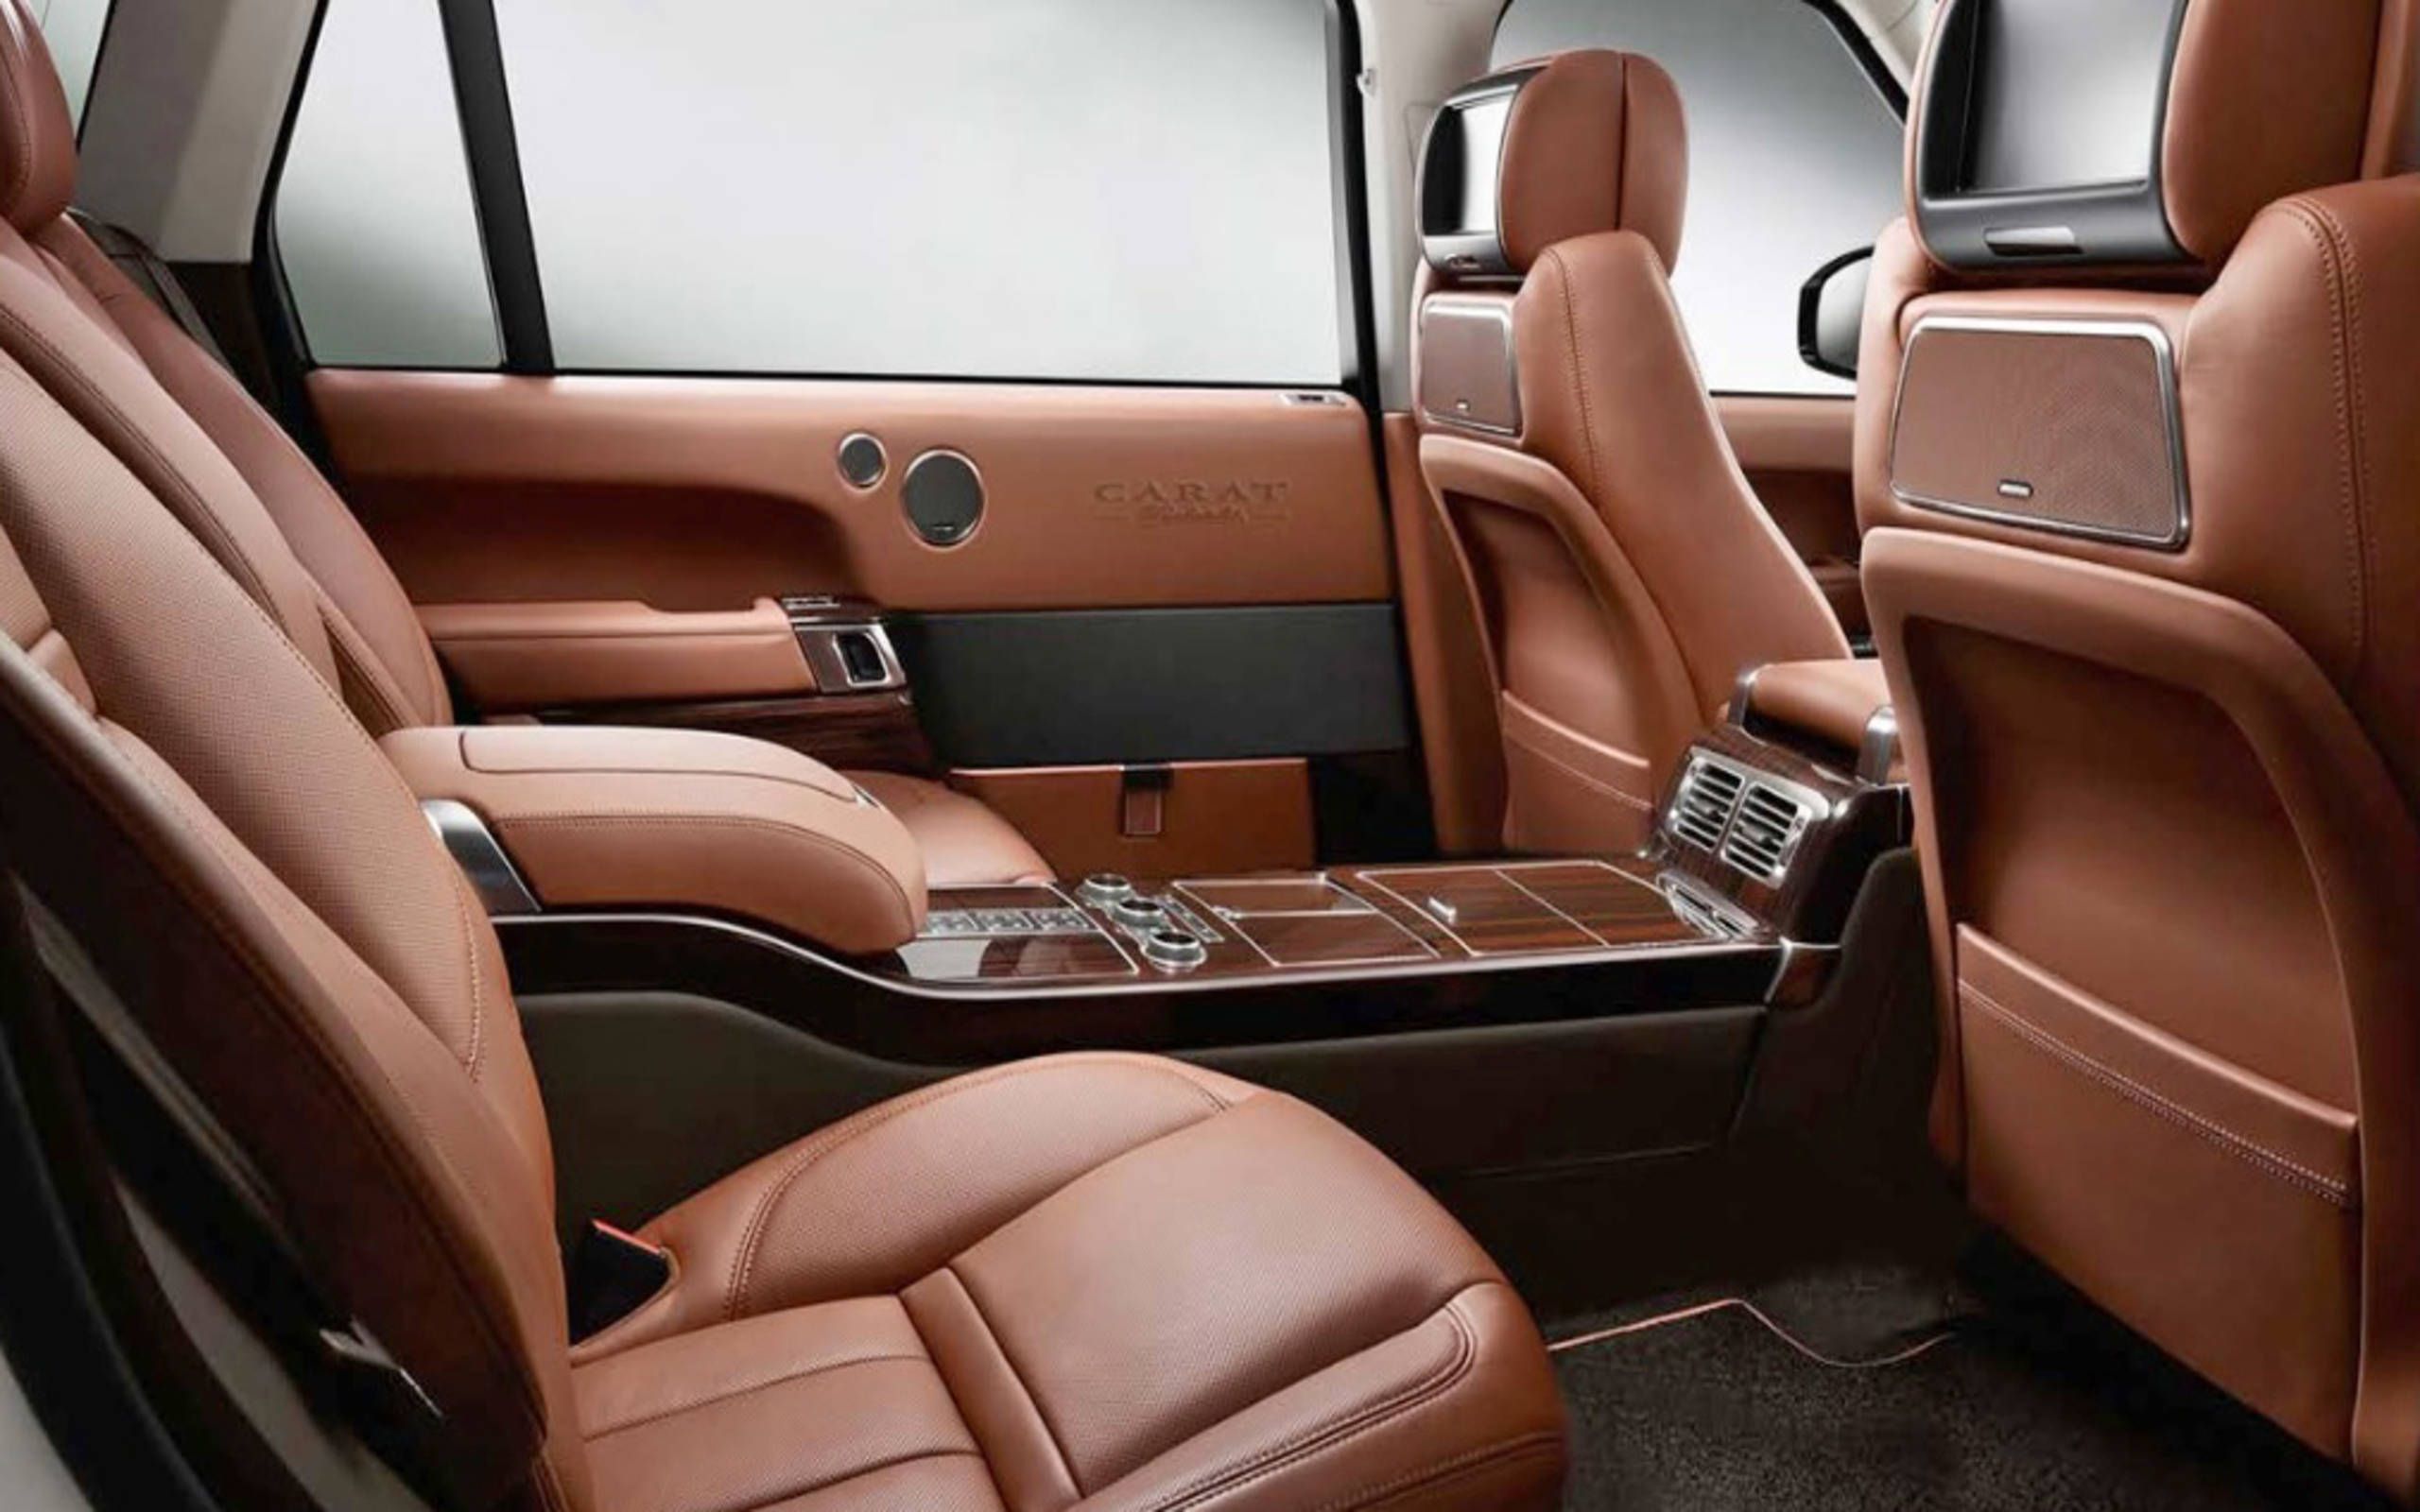 Carat Duchatelet S Range Rover Aims To Be The Maybach Of Suvs